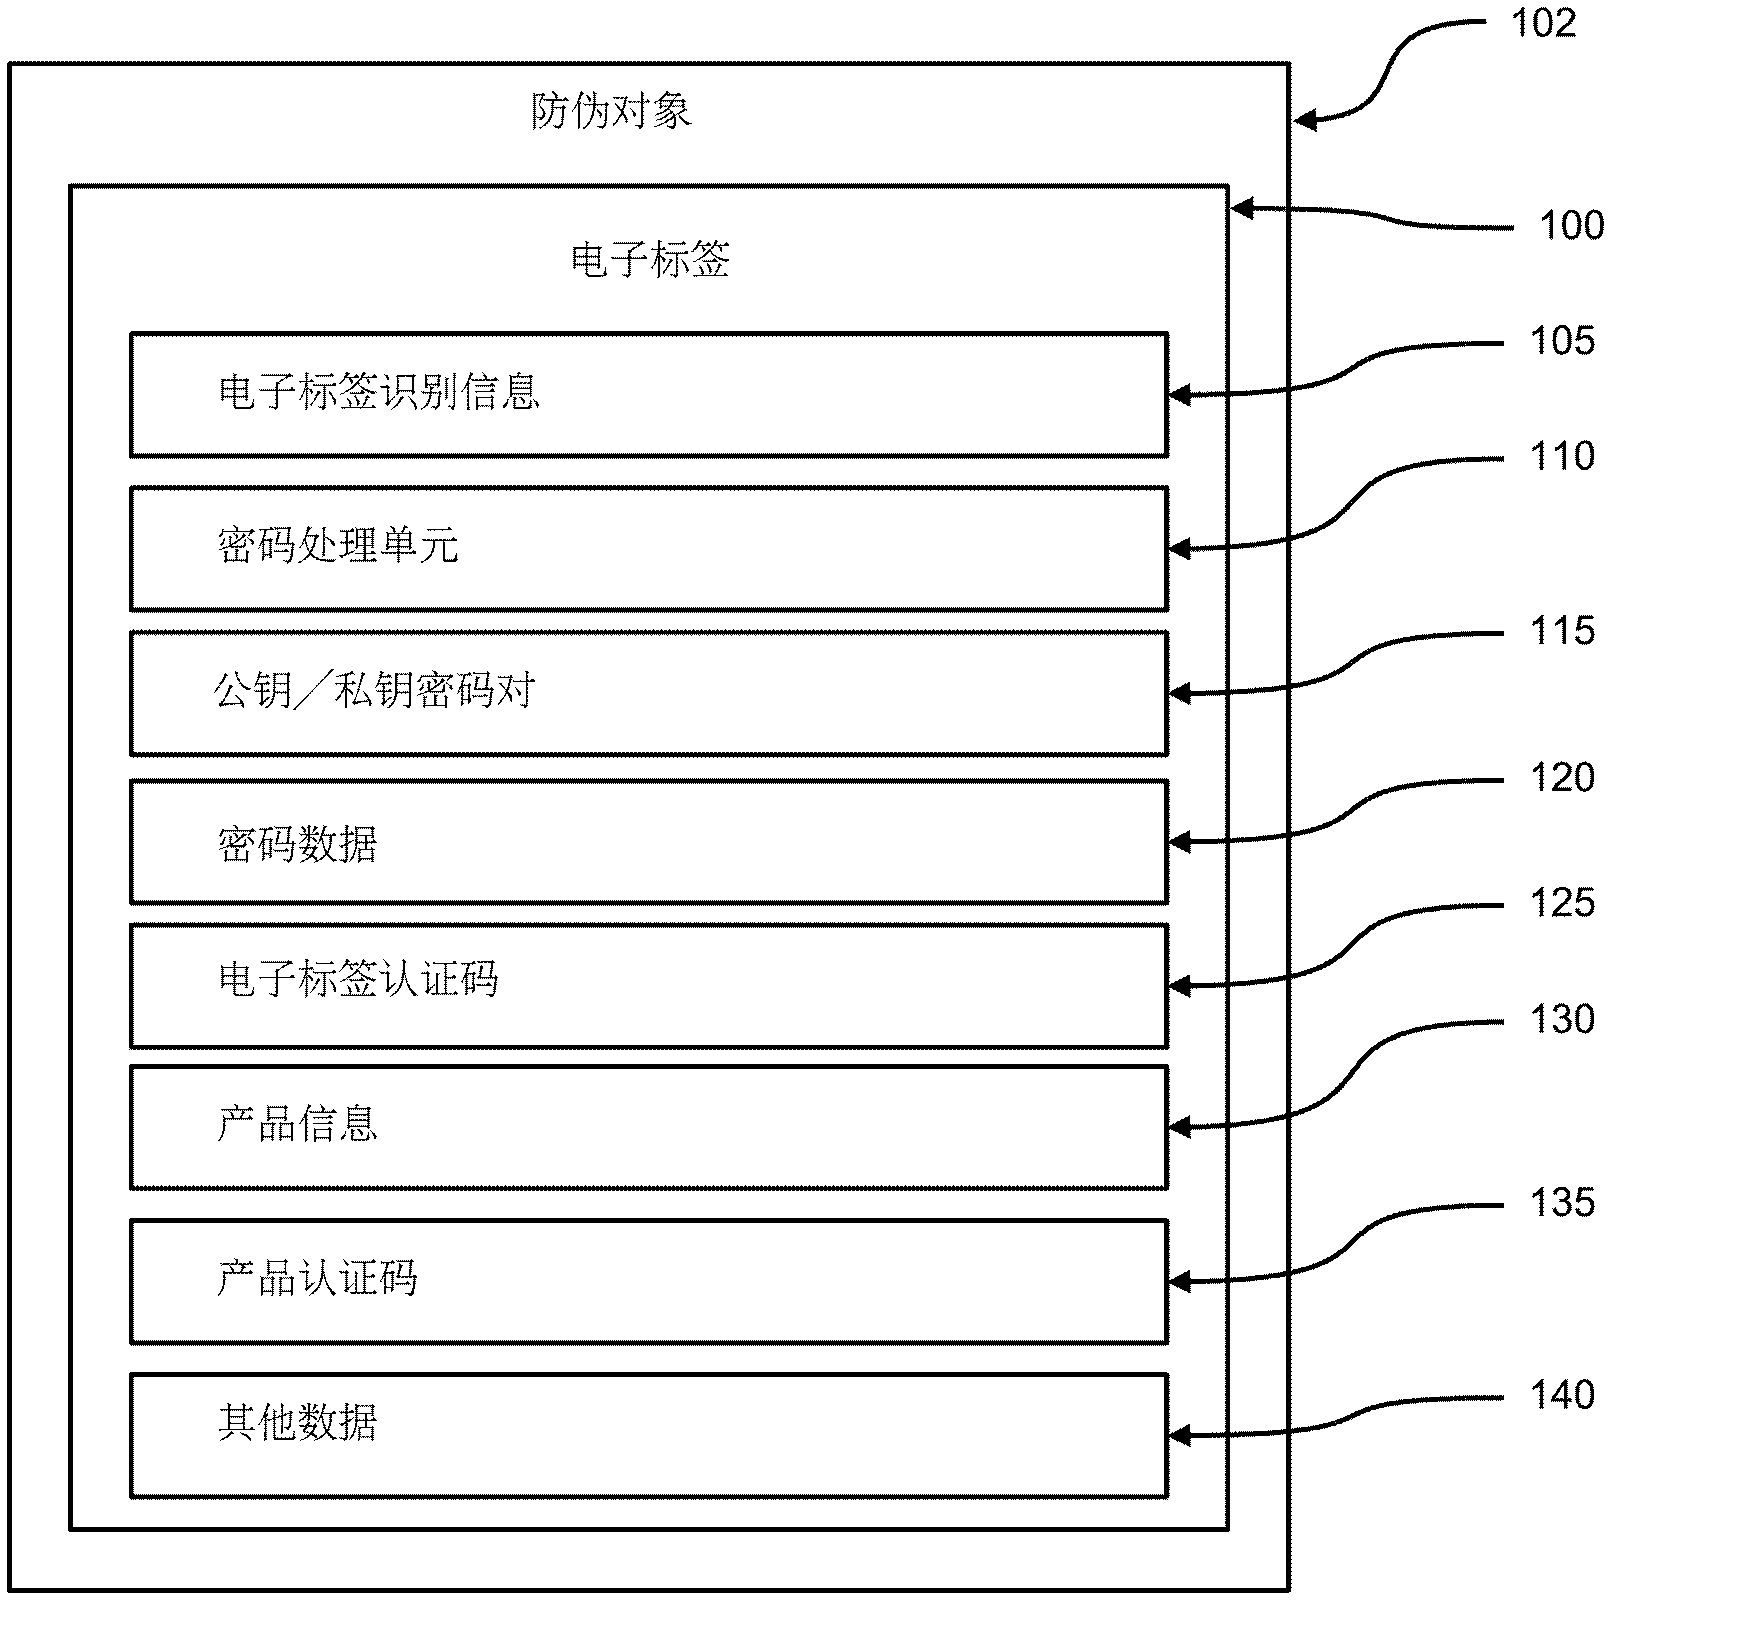 Product anti-counterfeiting method and system based on electronic tag